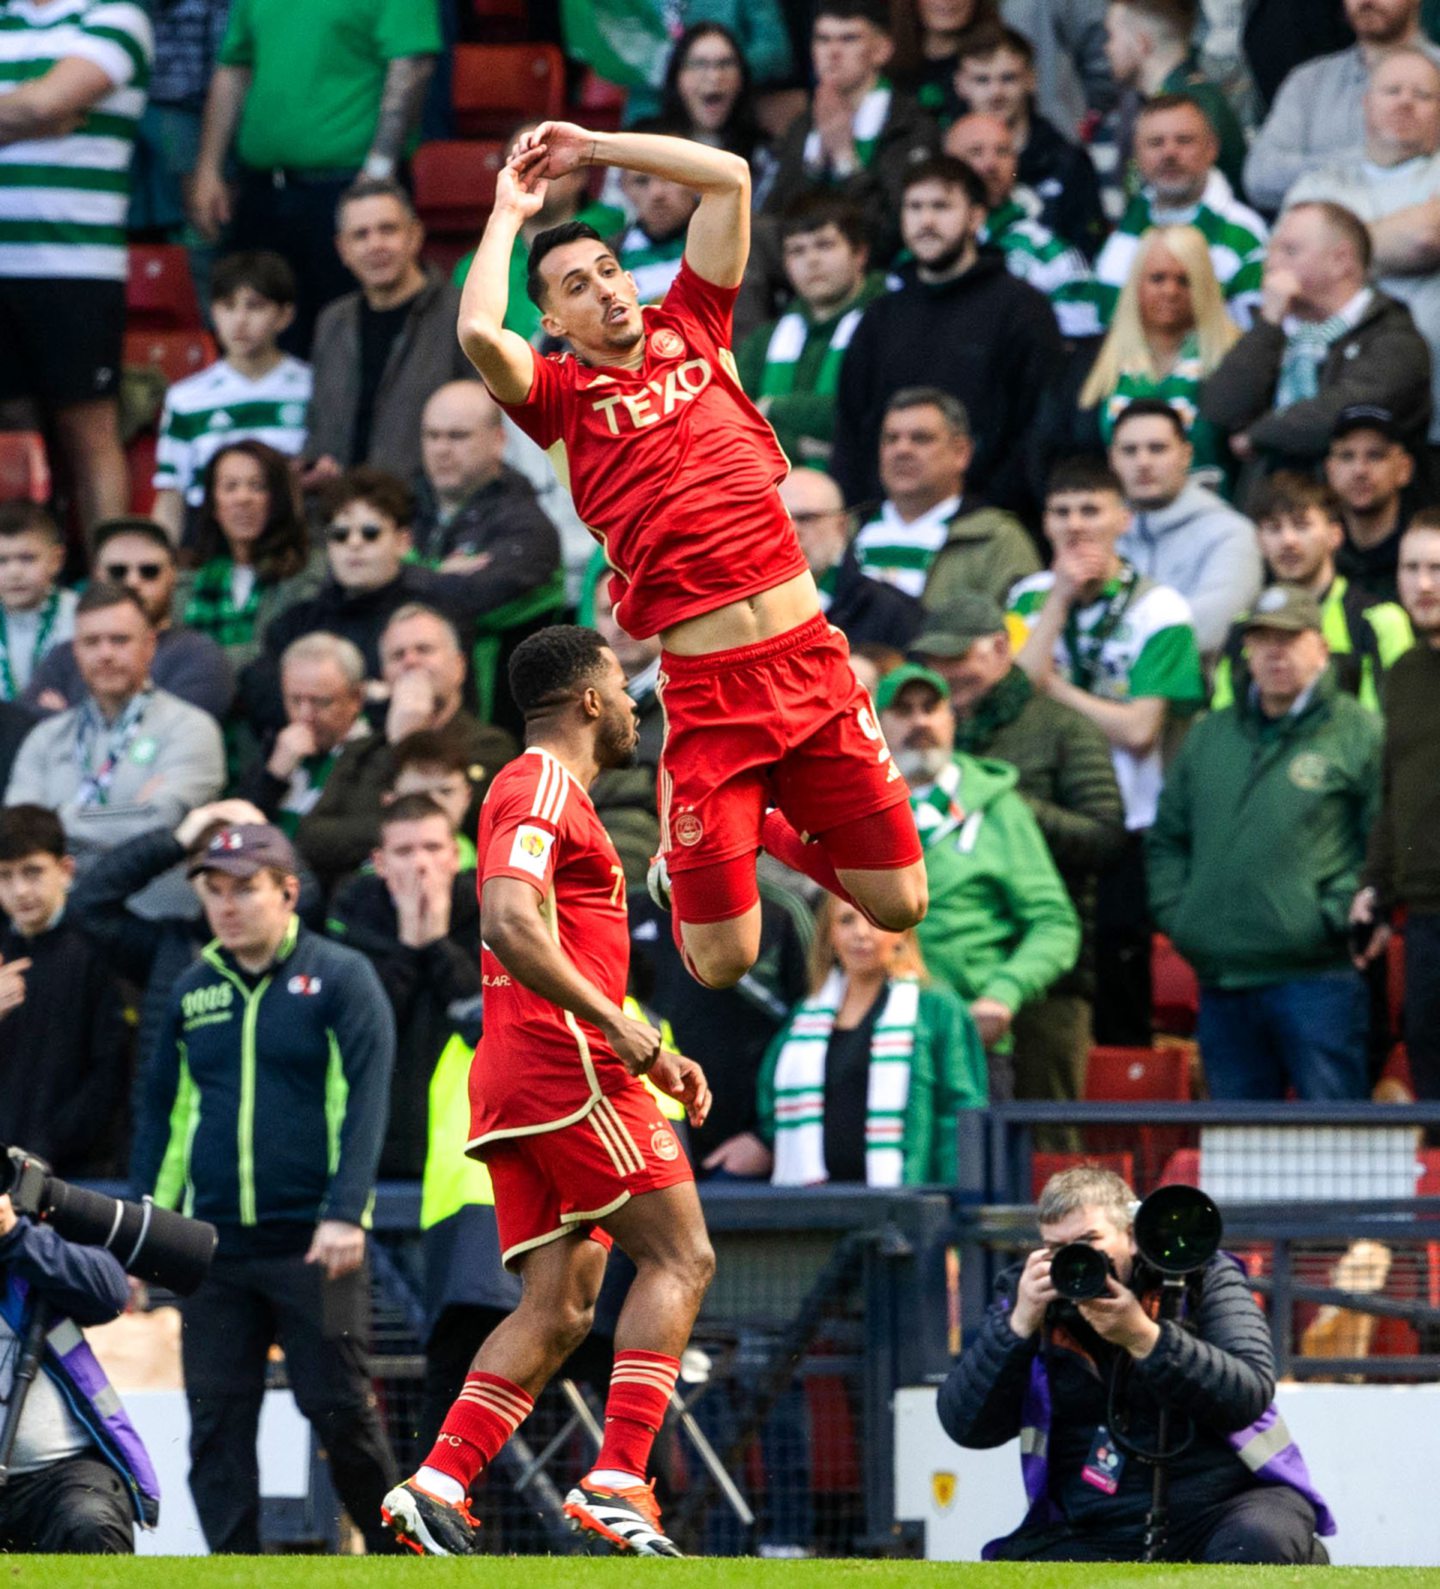 Aberdeen striker Bojan Miovksi celebrates after scoring to make it 1-0 against Celtic in the Scottish Cup semi-final at Hampden. Image: SNS